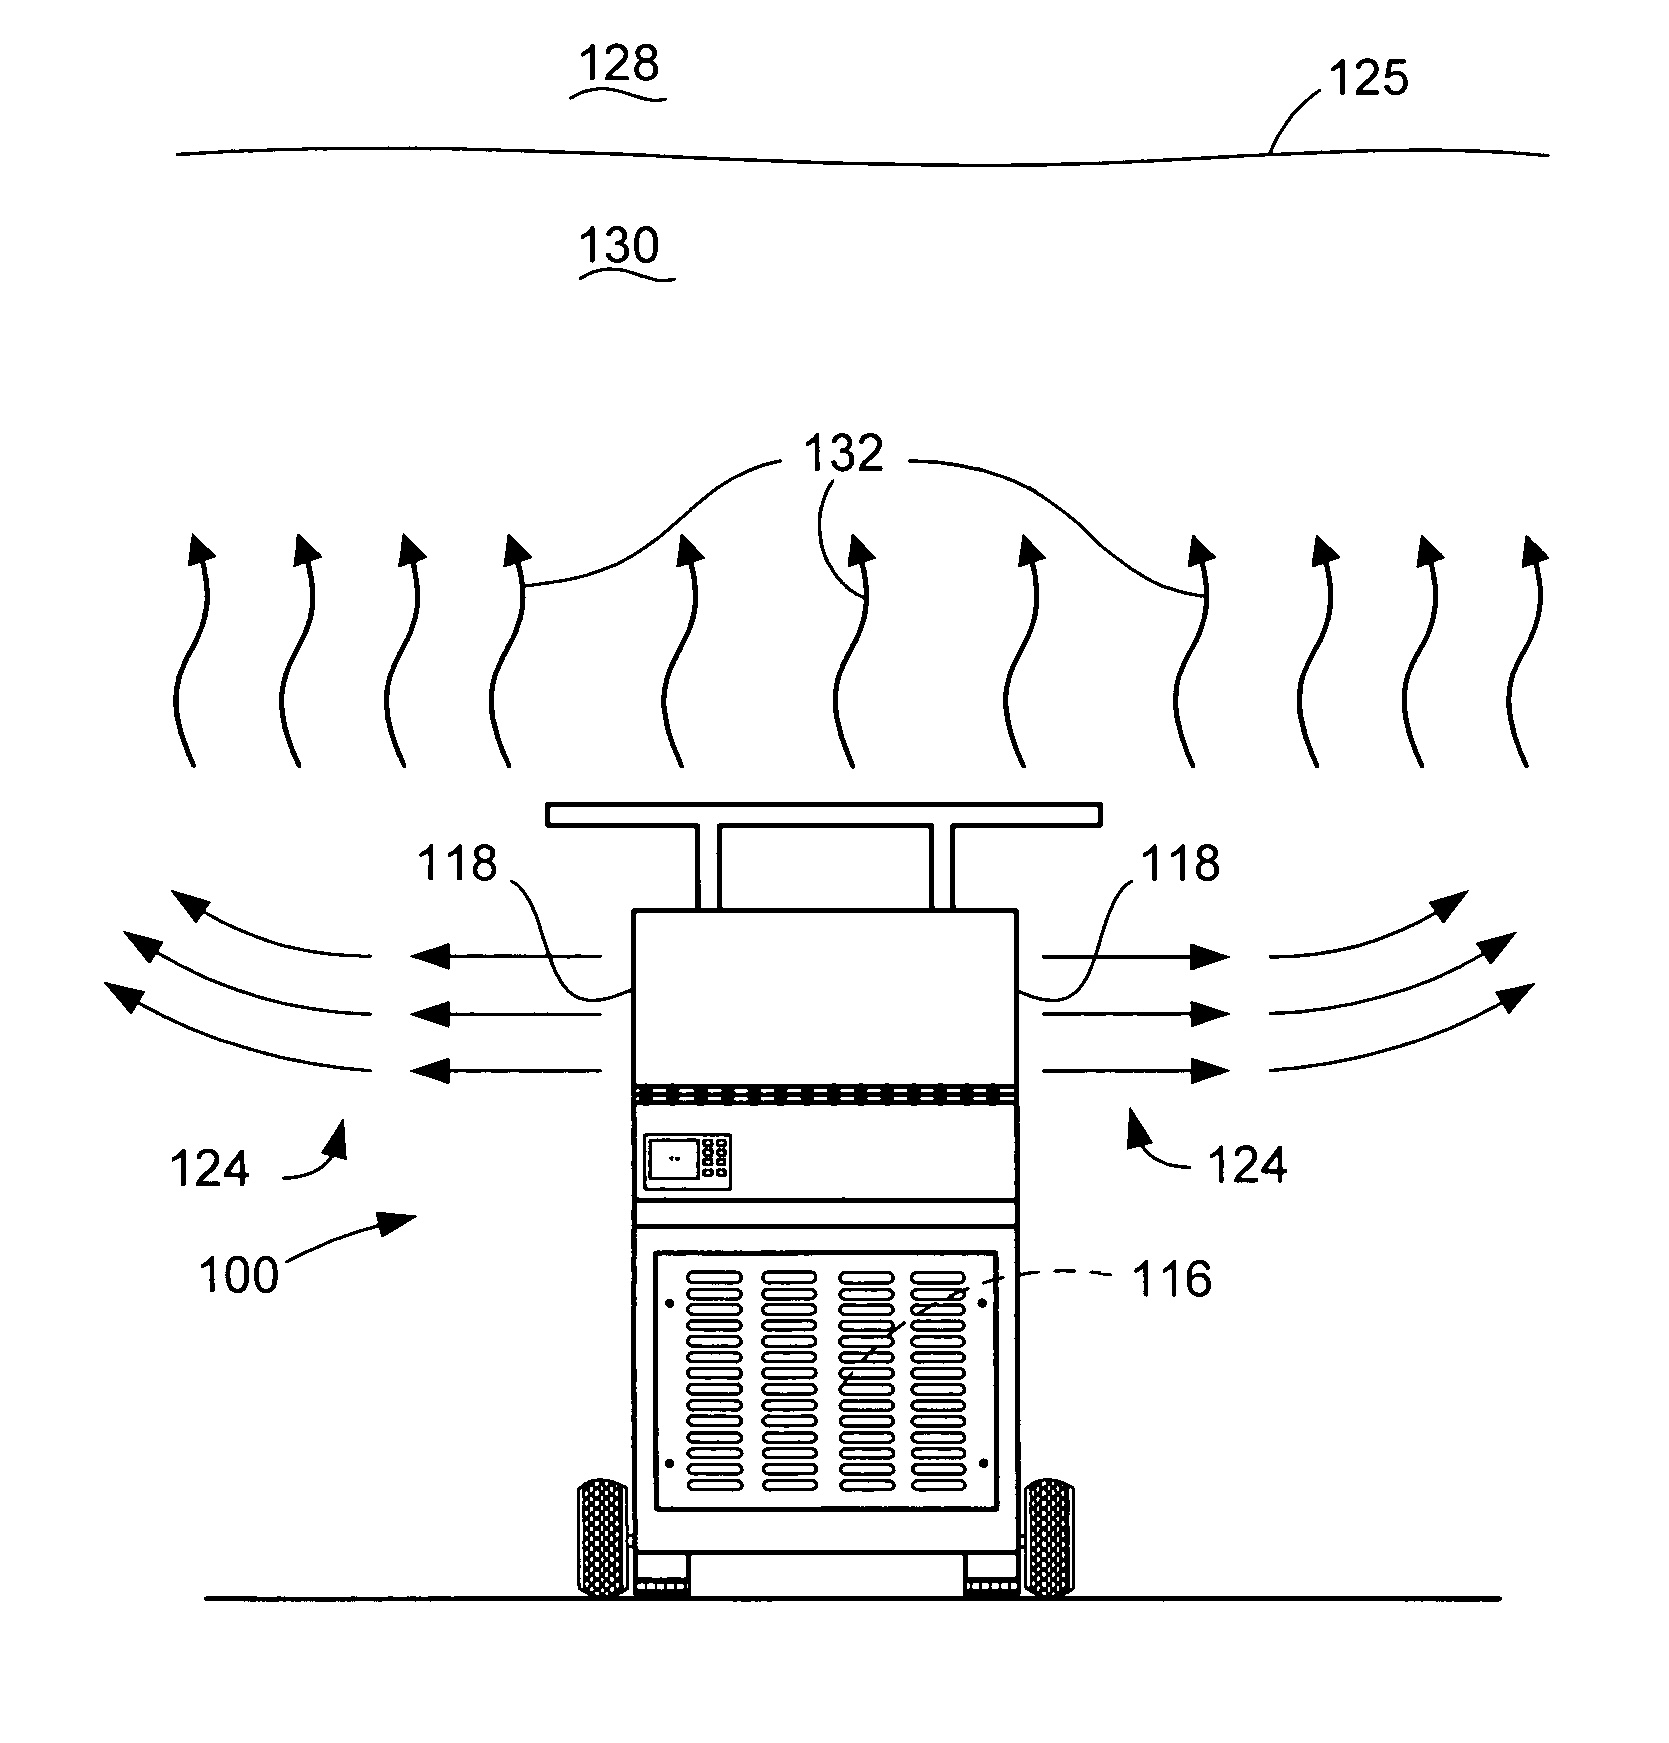 Portable thermal-stratifying space heater and powerplant package